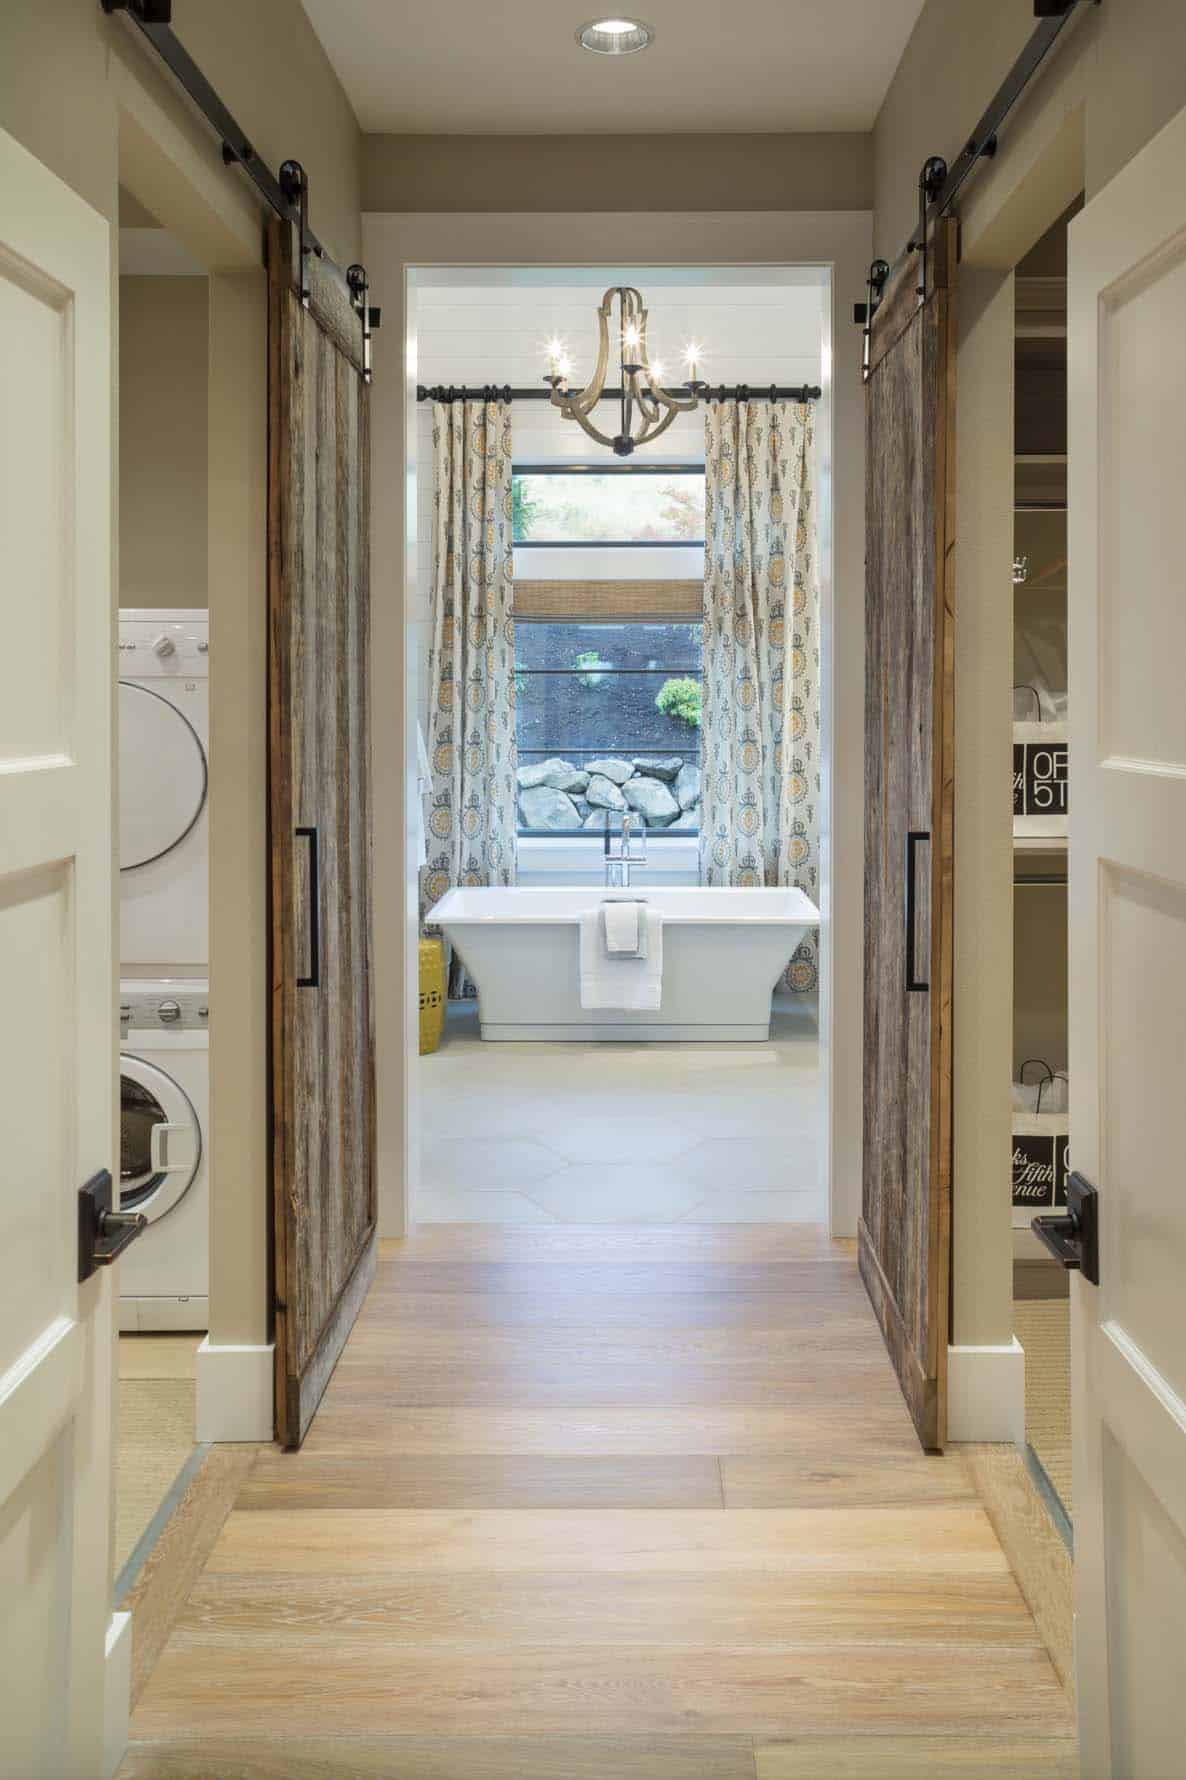 transitional style bedroom hallway with a washer/dryer leading to the bathroom